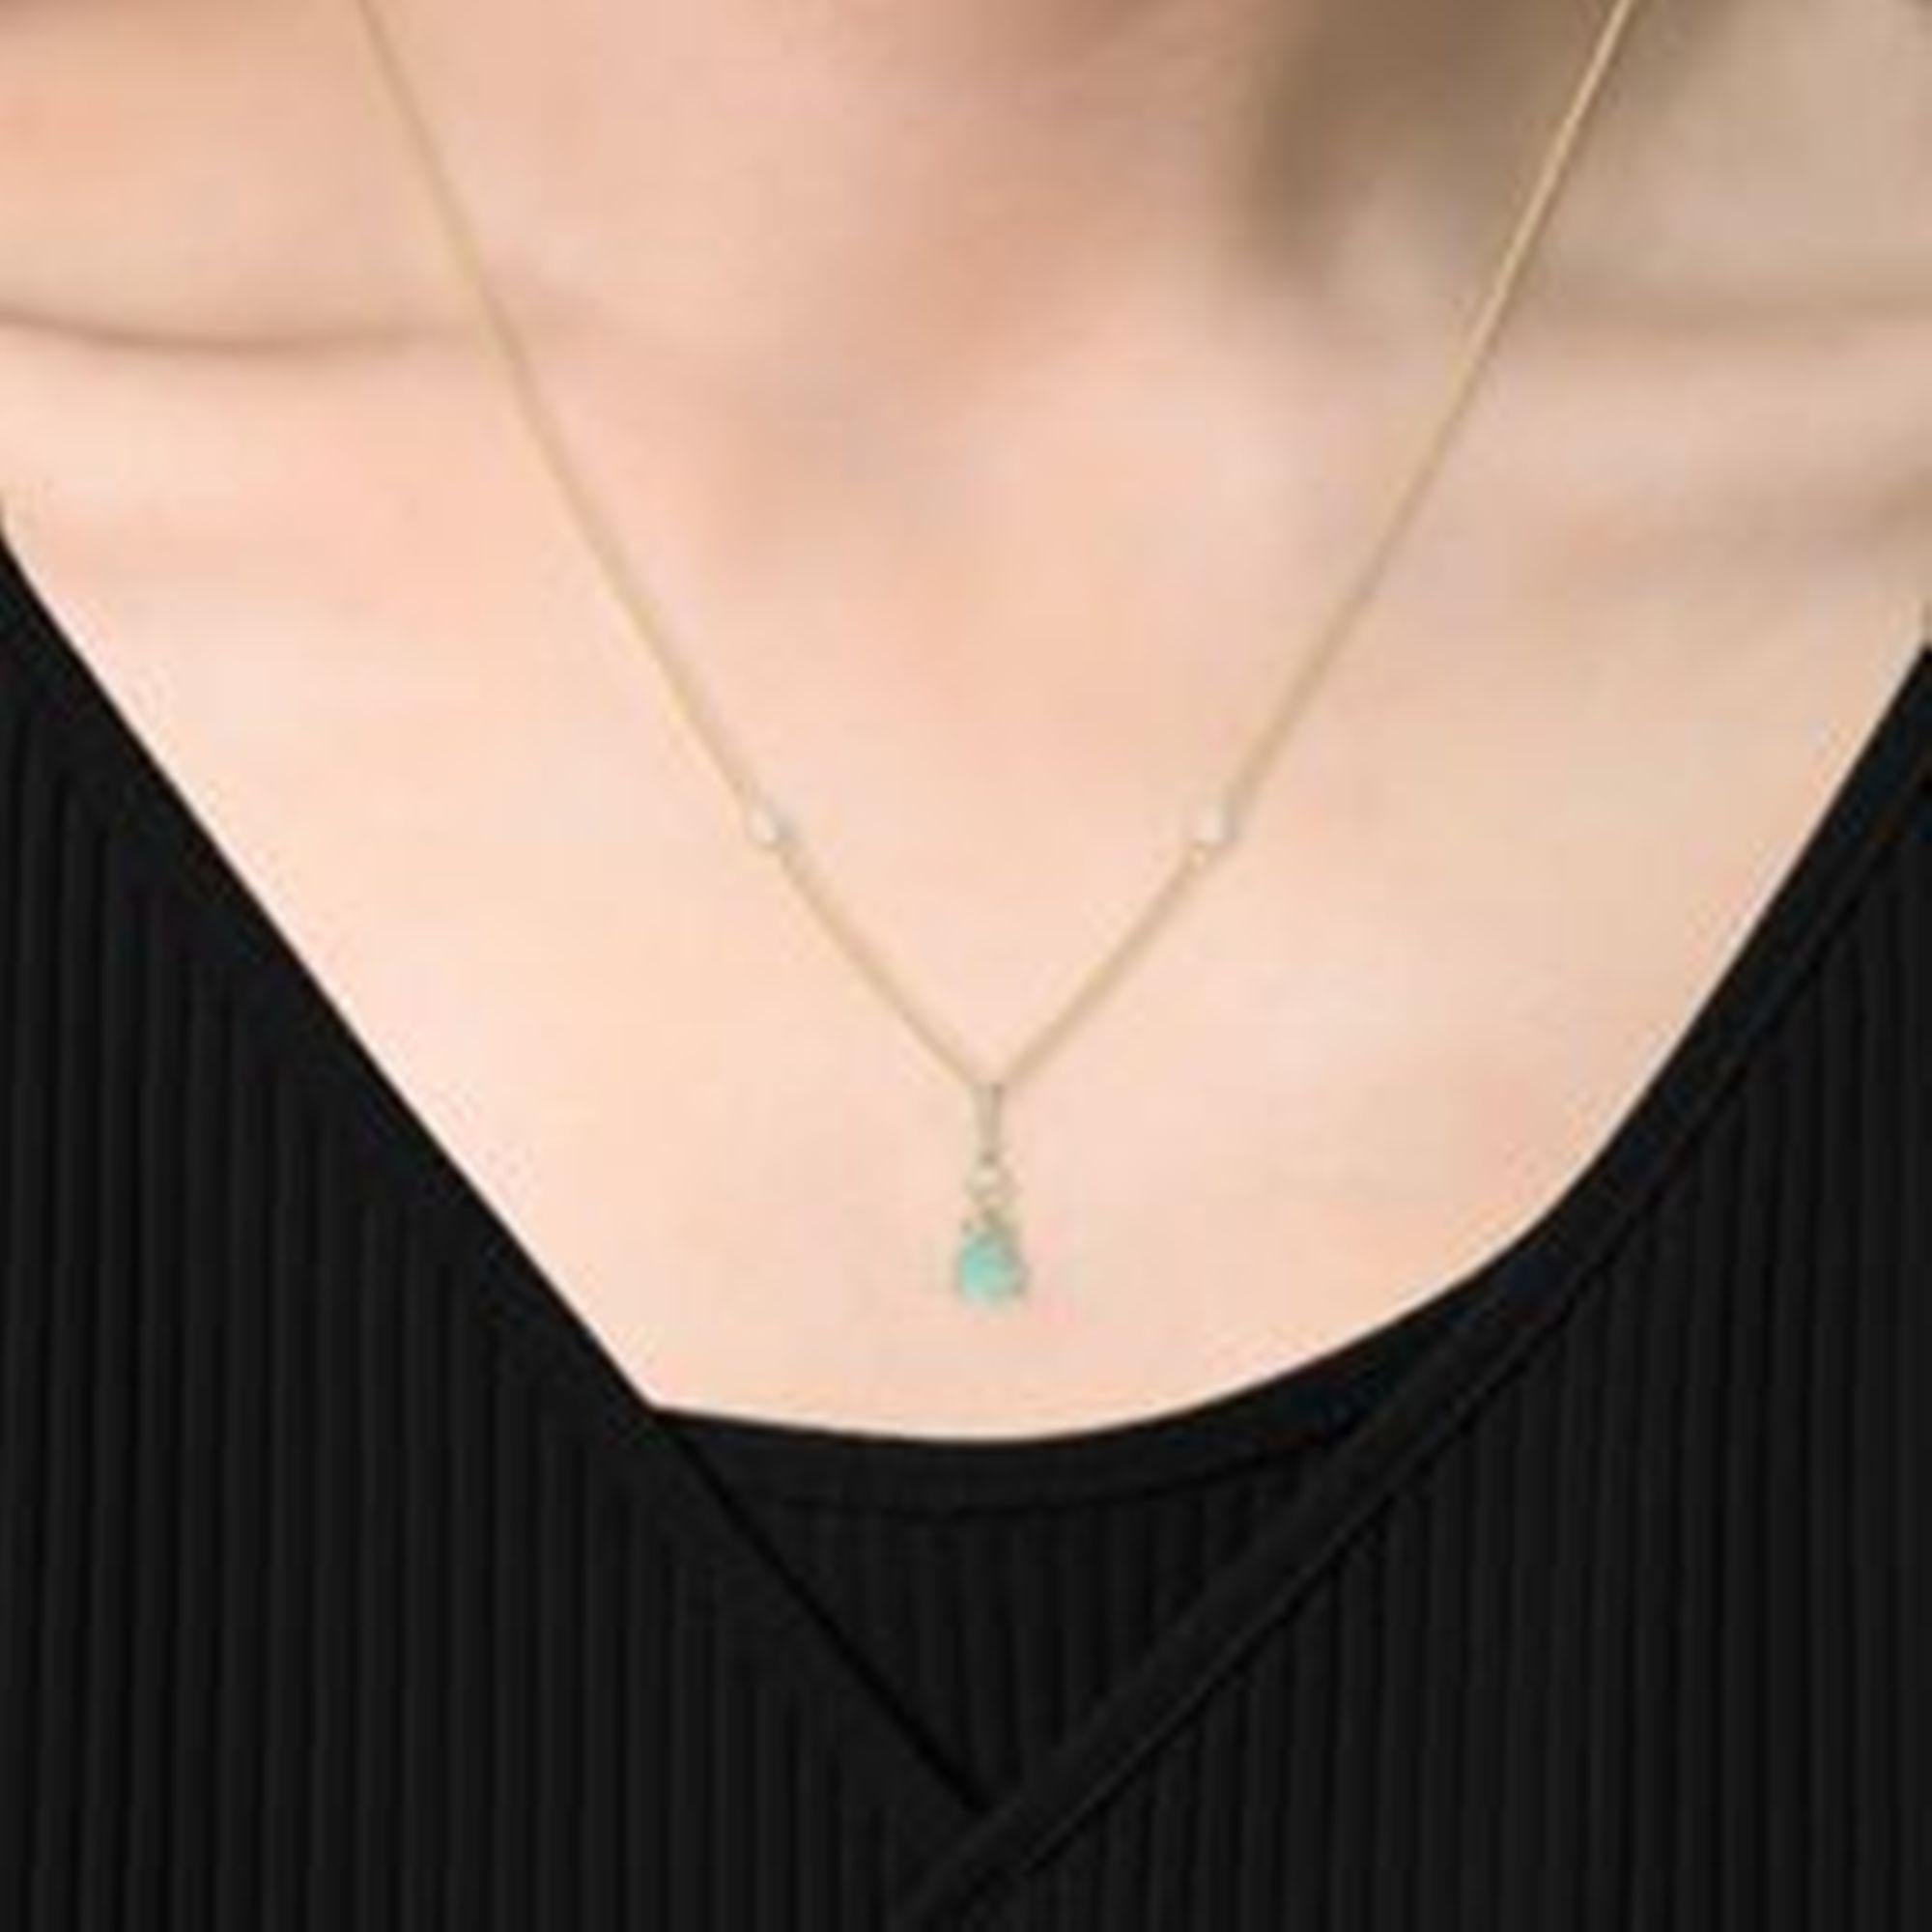 Decorate yourself in elegance with this Pendant is crafted from 14-karat White Gold by Gin & Grace. This Pendant is made up of Pear-Cut Aquamarine (1 pcs) 0.94 carat and Round-cut White Diamond (17 Pcs) 0.13 Carat. This Pendant is weight 1.74 grams.